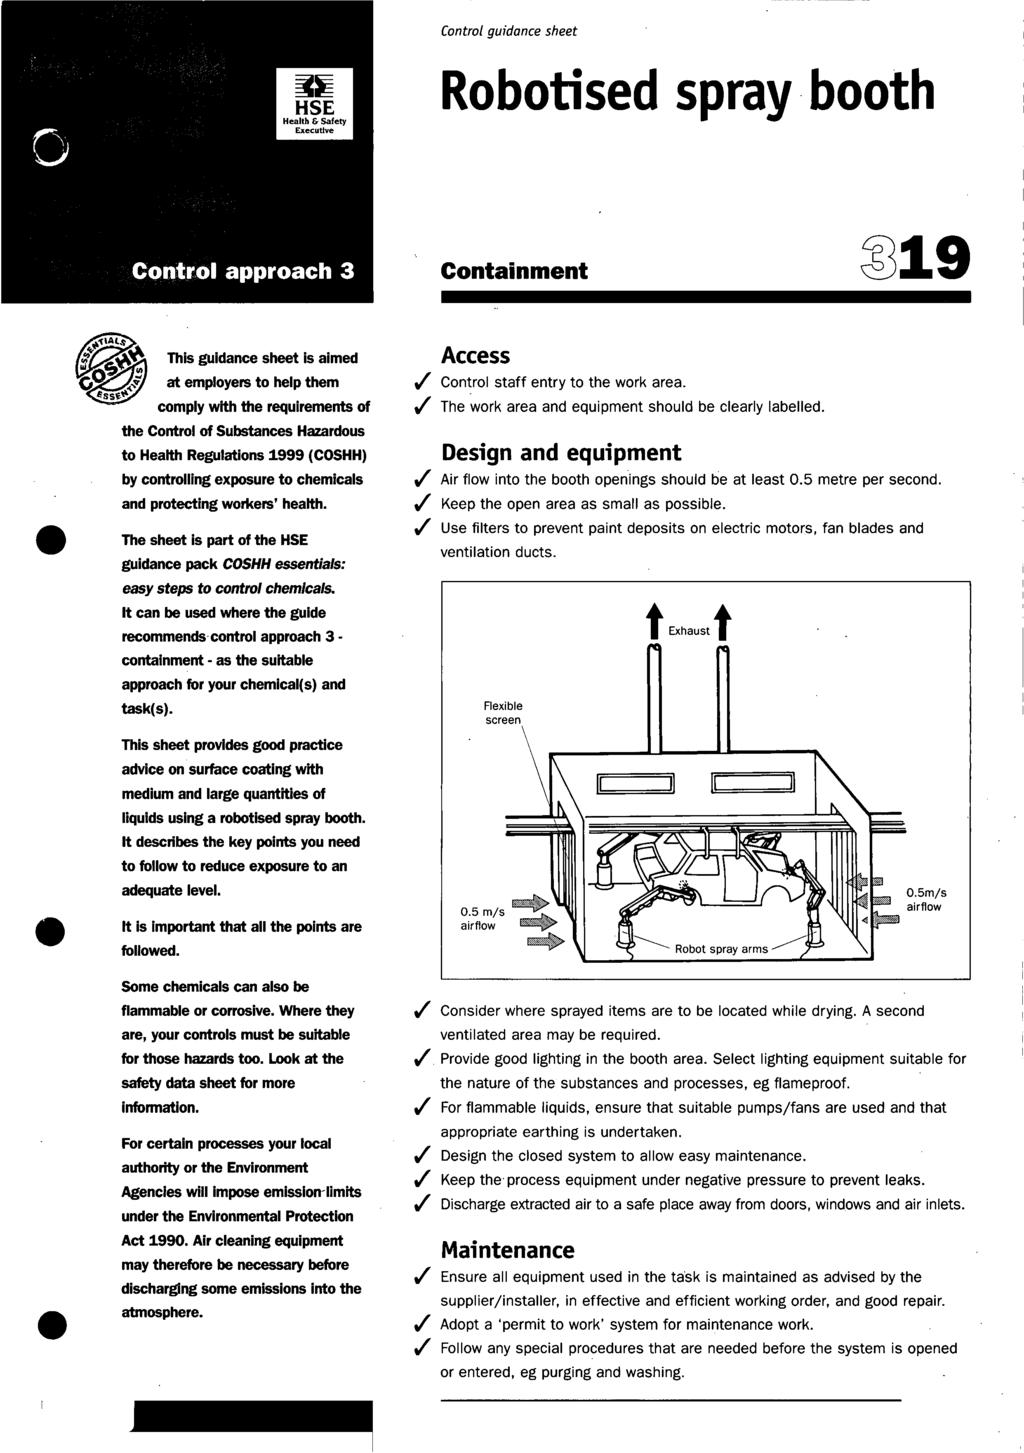 Control guidance sheet Robotised spray booth Containment 819 0 a This guidance sheet is aimed at employers to help them comply with the requirements of the Control of Substances Hazardous to Health